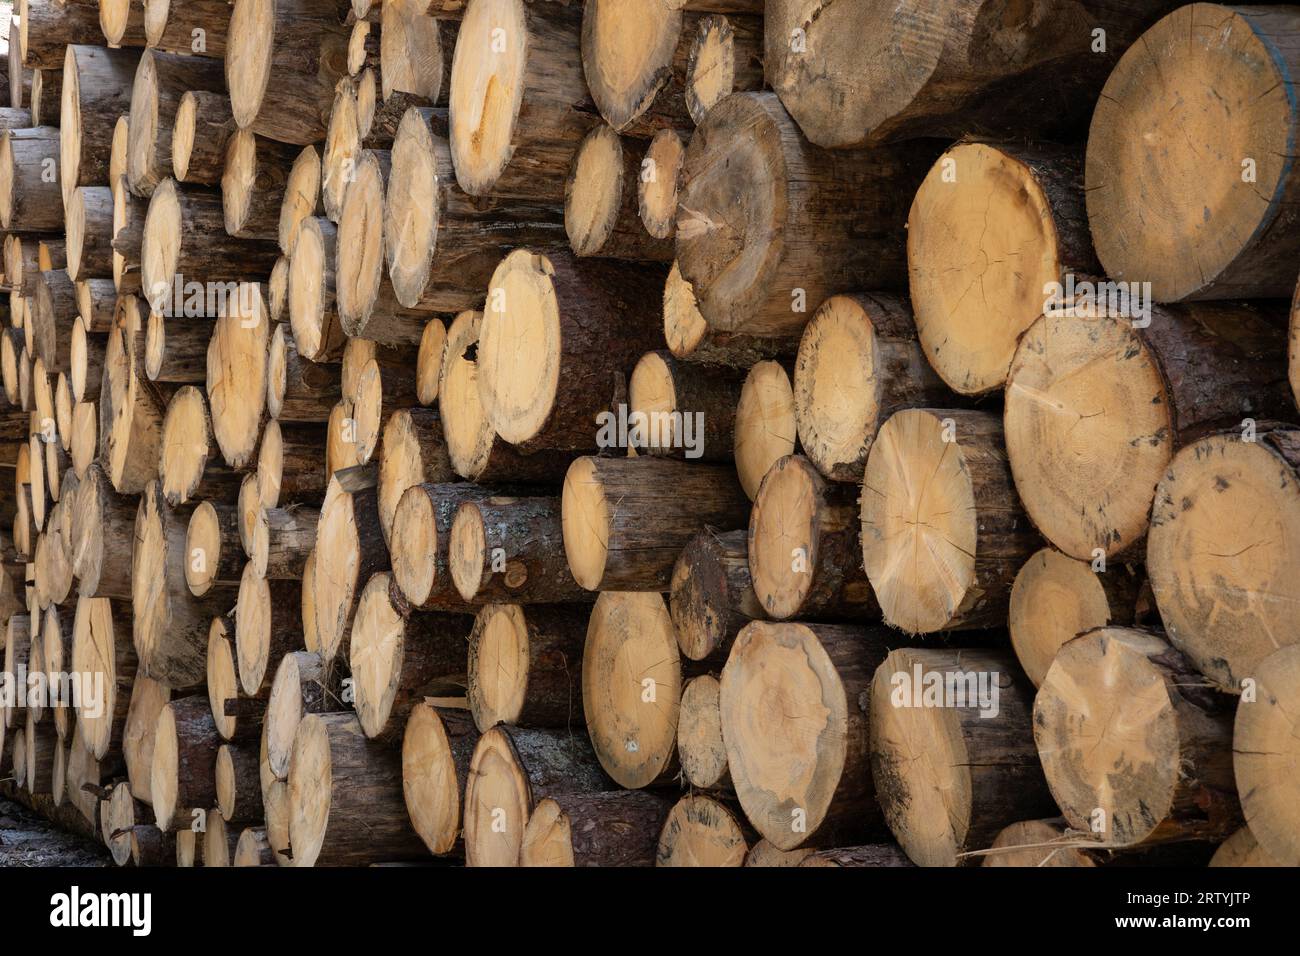 freshly cut fir logs stacked Stock Photo